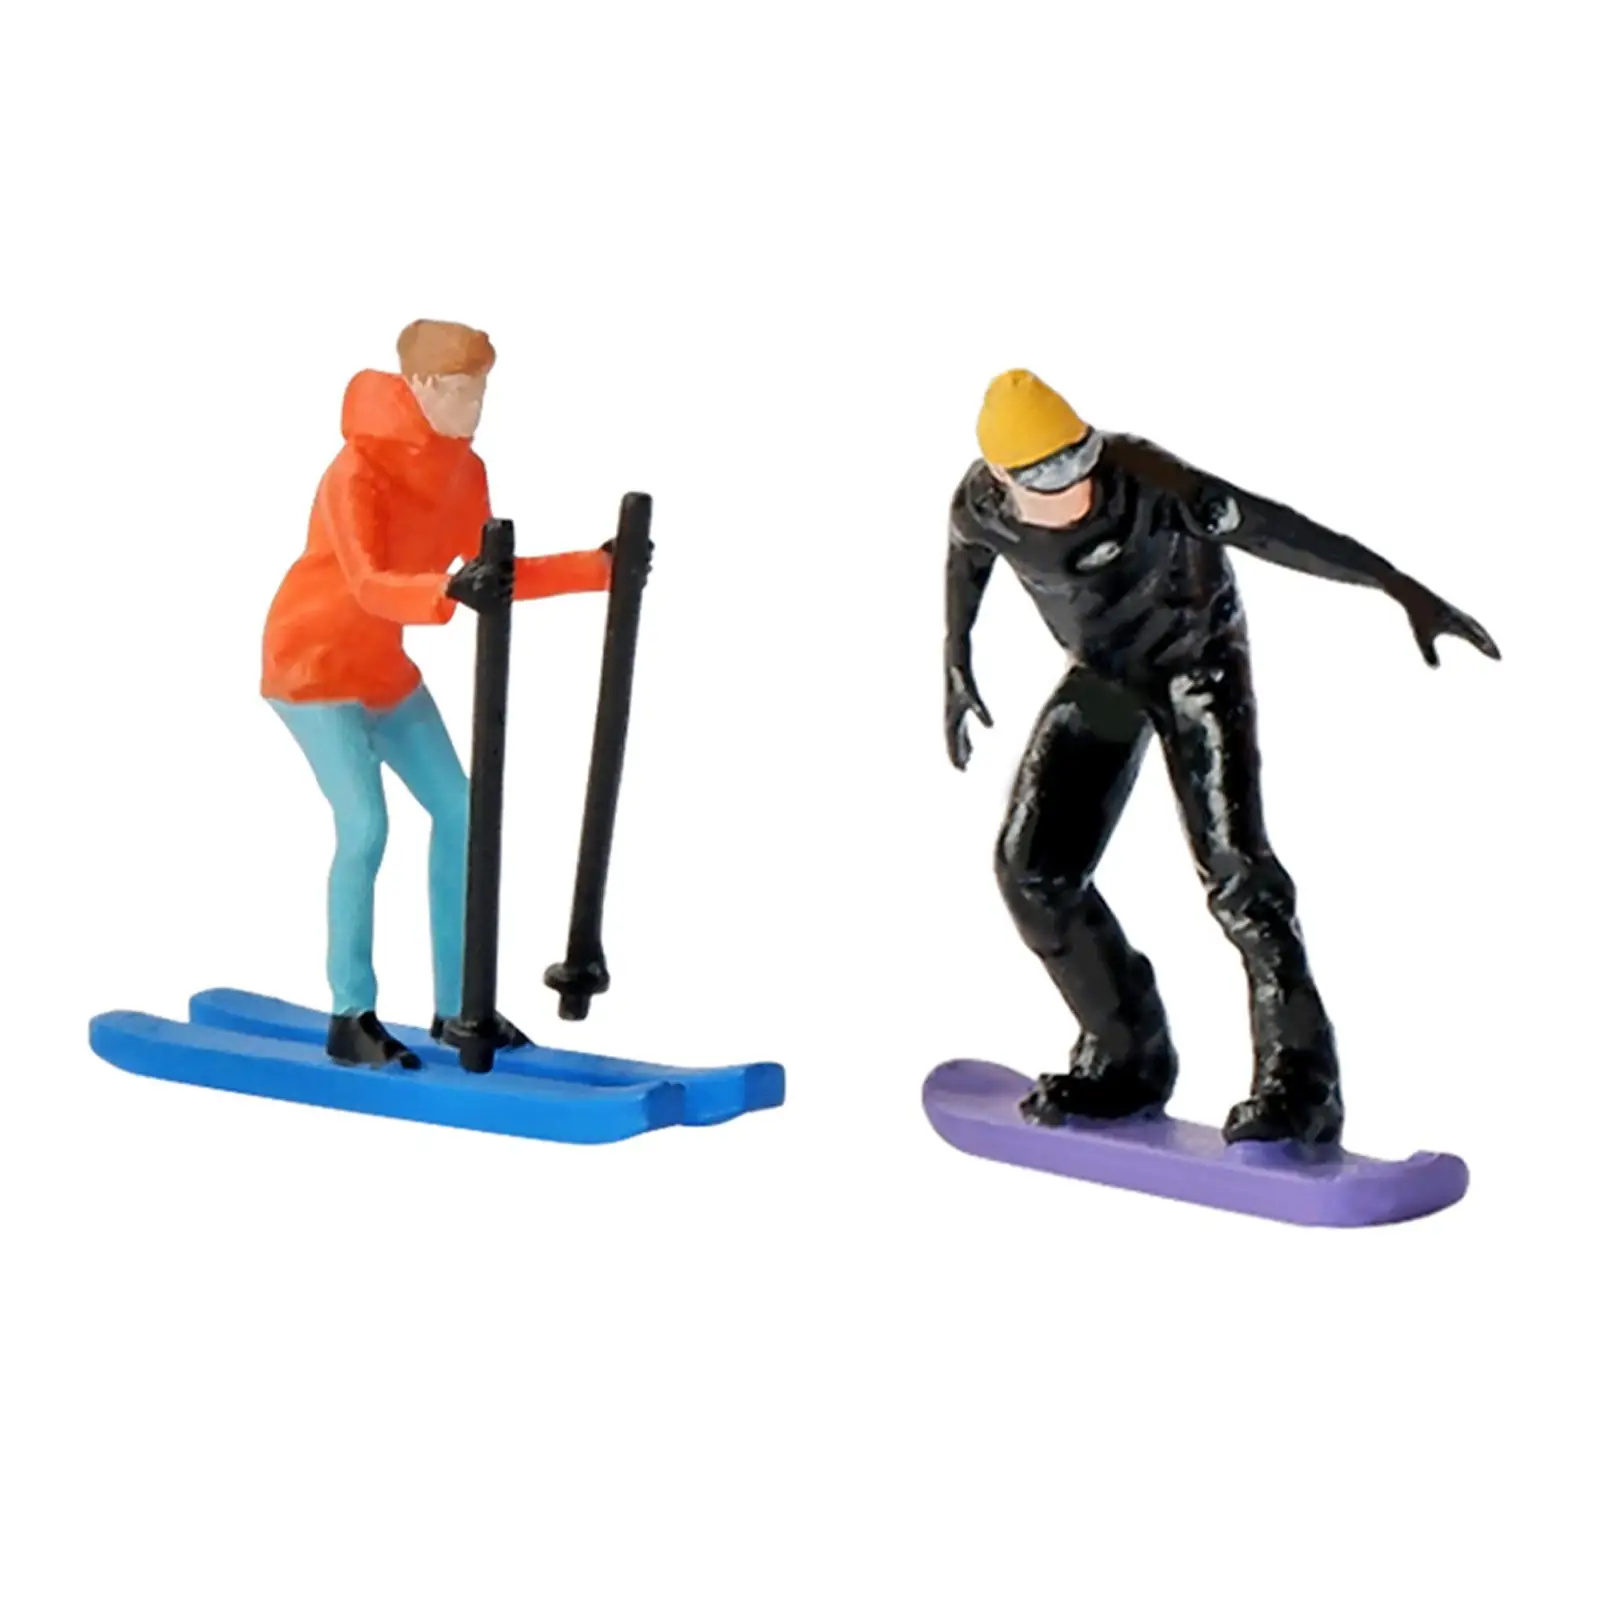 1/64 Scale Skiing Model People Figures Simulation Figurines Realistic Figures for Sand Table Diorama DIY Scene Layout Decoration